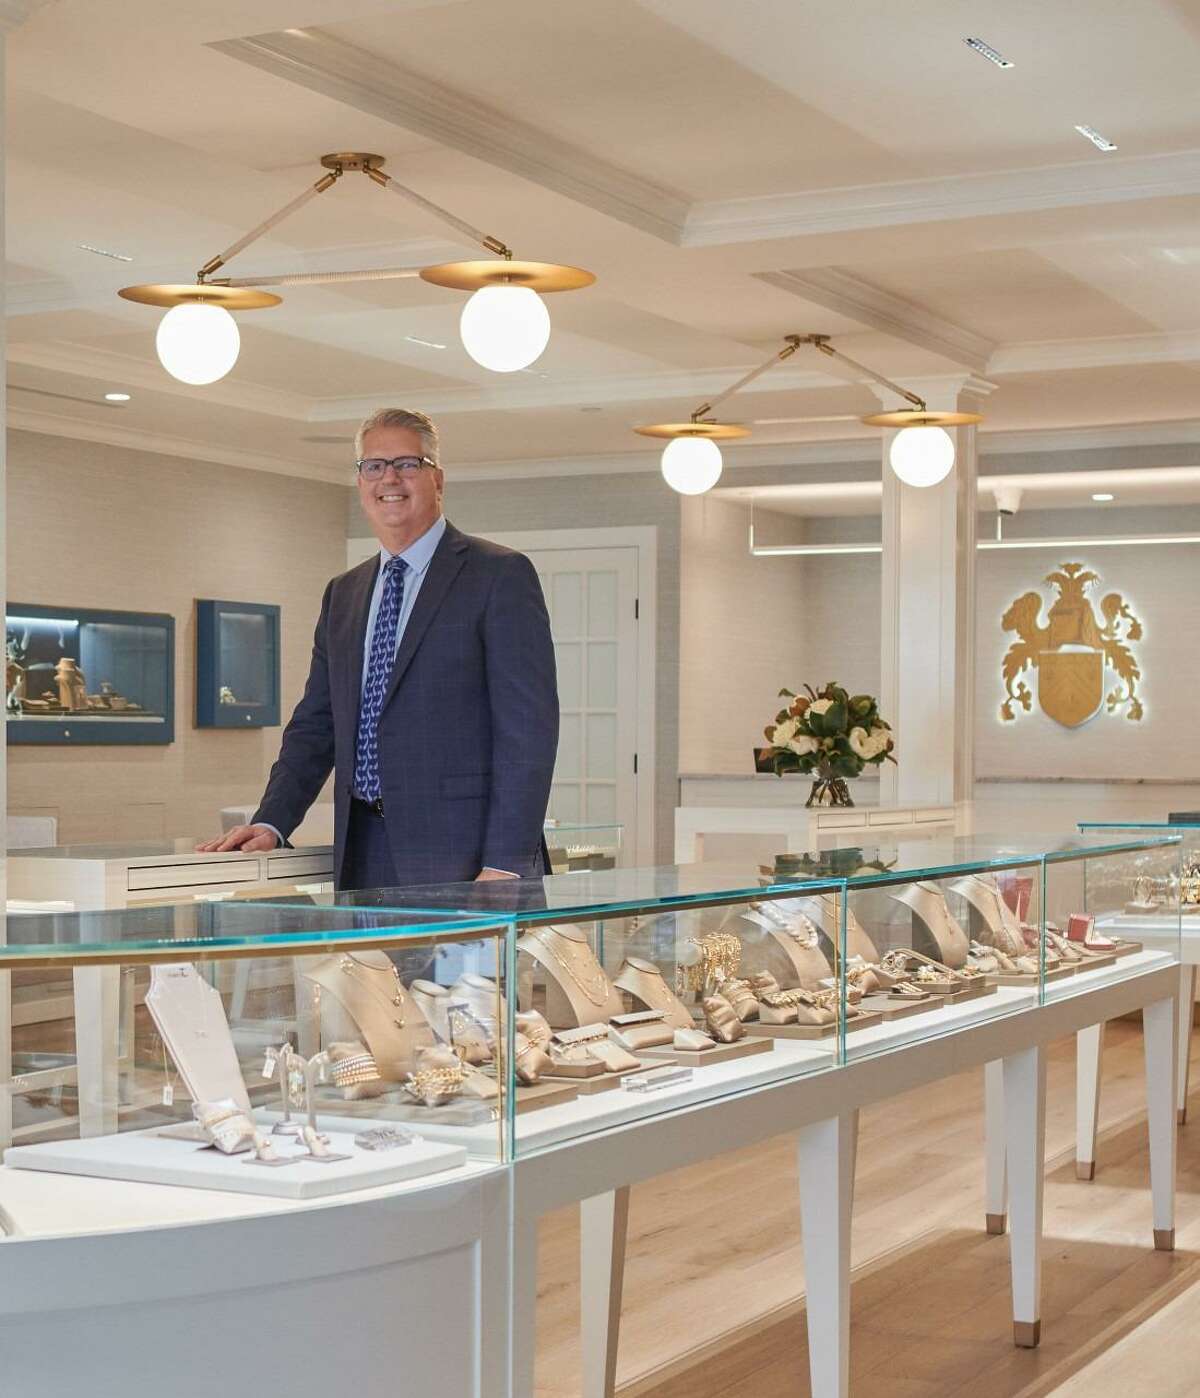 David Glucksman, who is a Fairfield resident, has been appointed store manager of Henry C. Reid & Son Jewelers, the 111-year-old jewelry store that is located at 1591 Post Road in Fairfield.